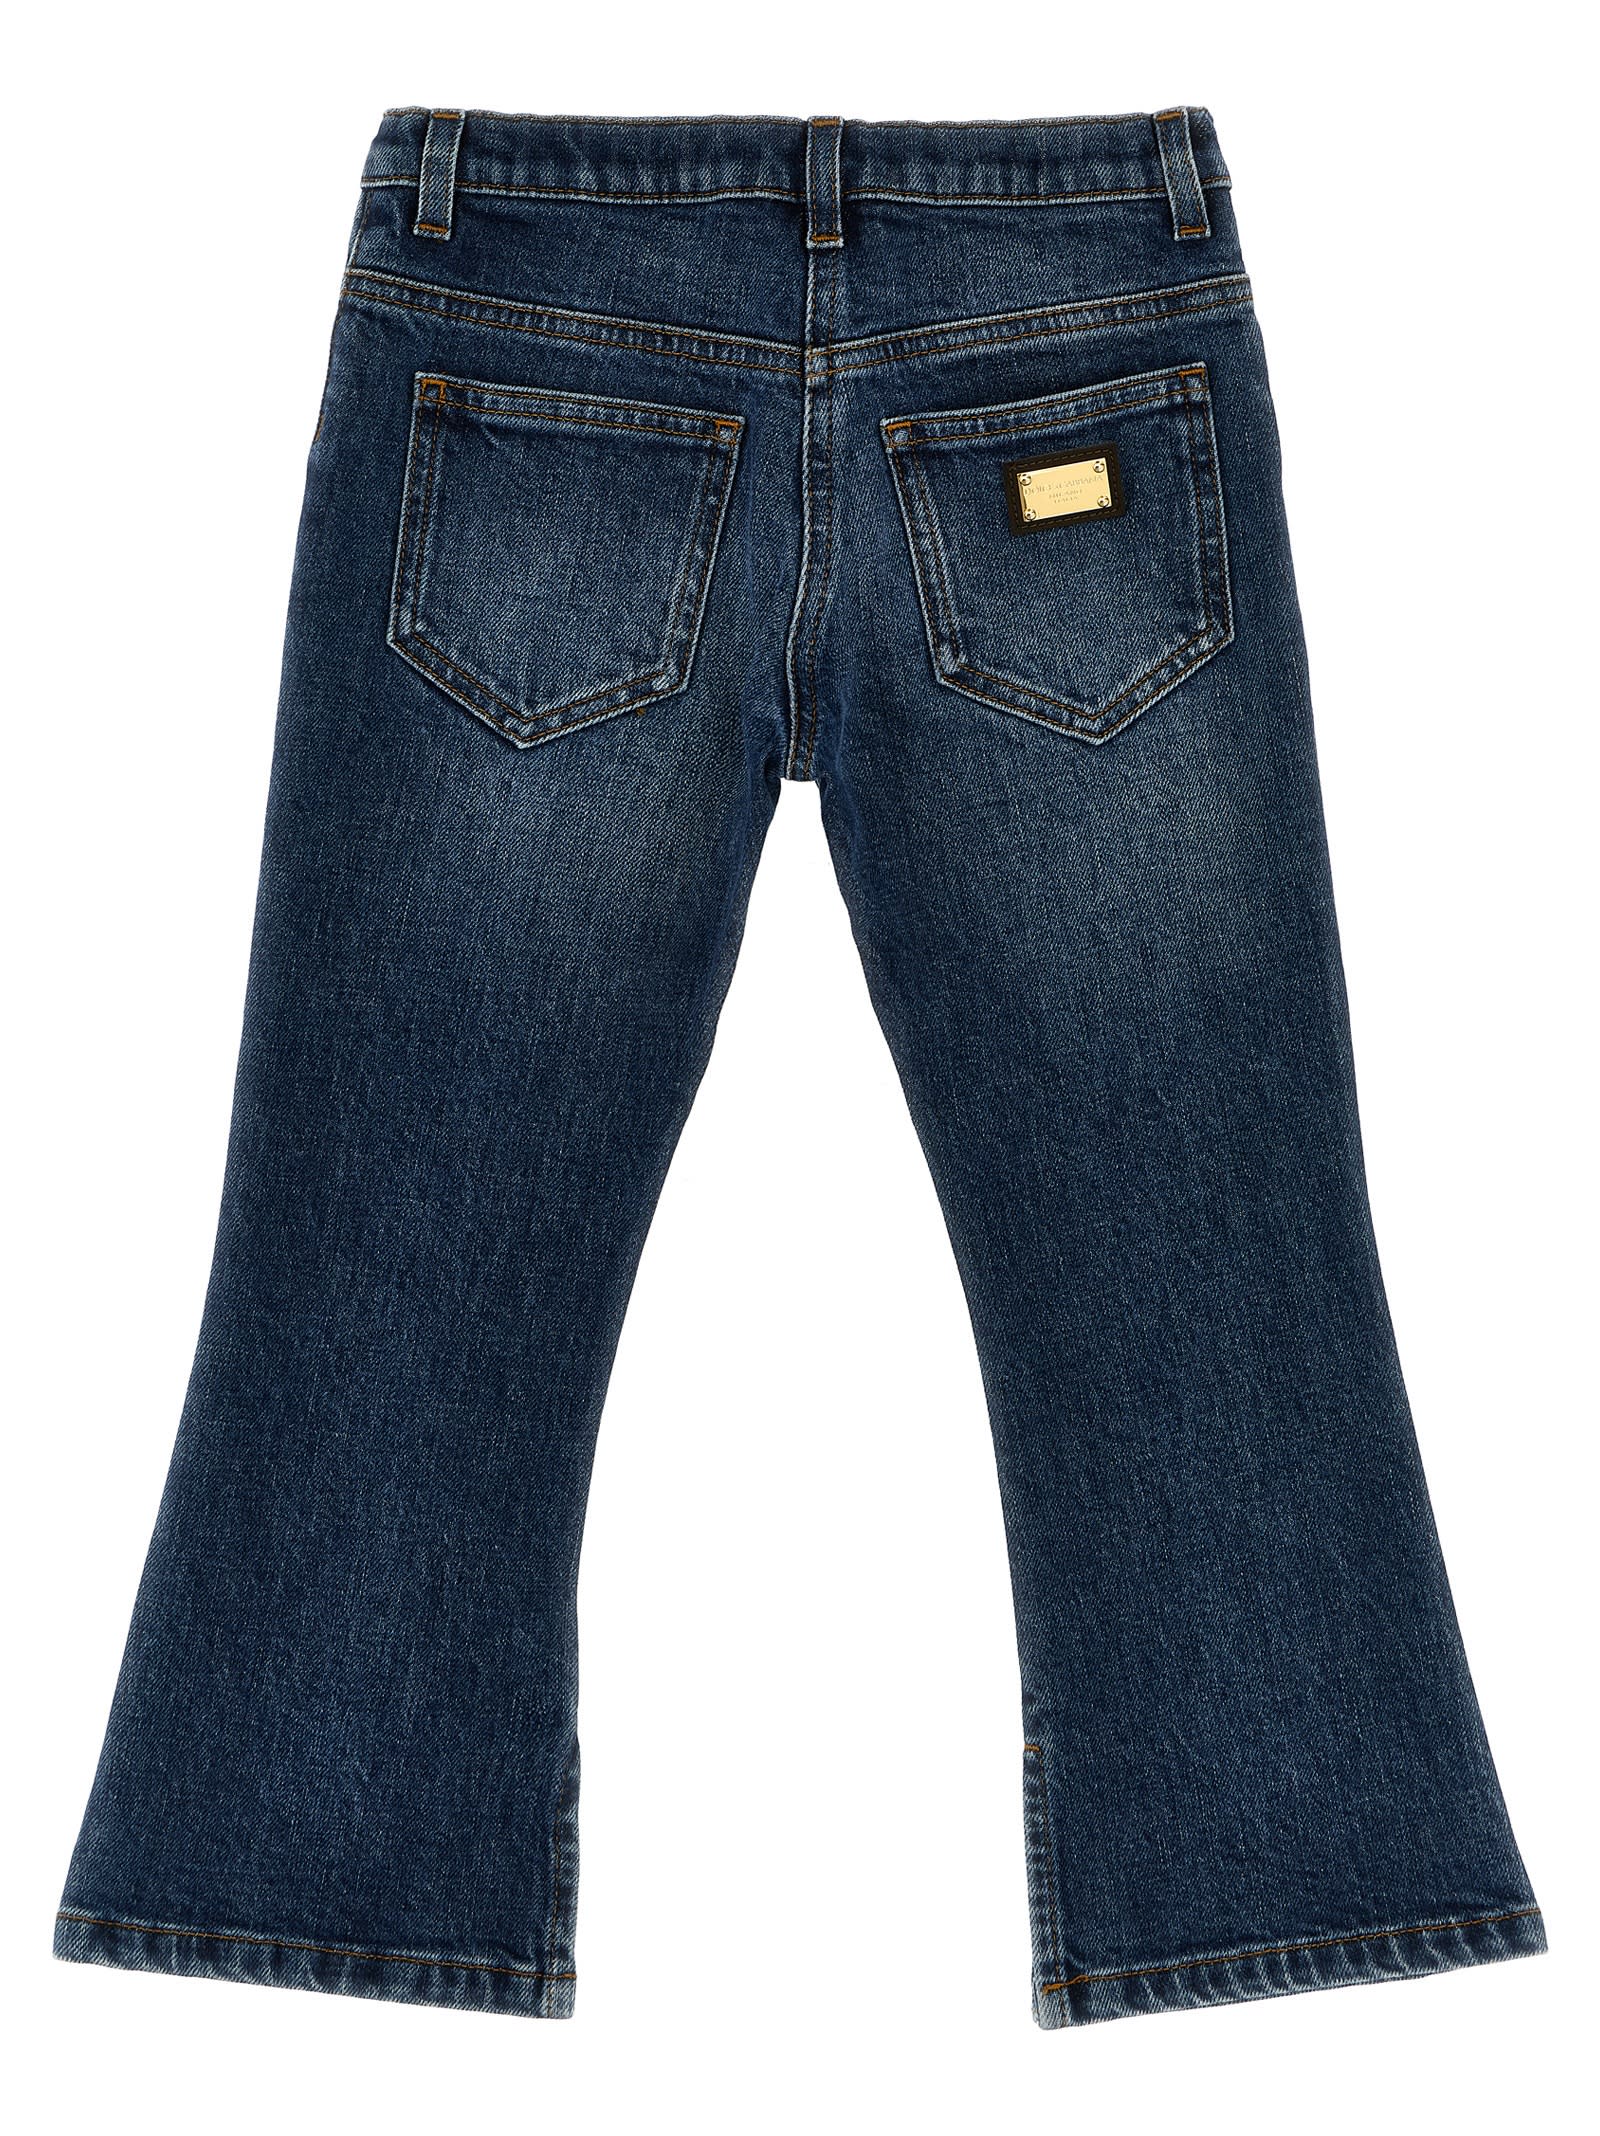 Shop Dolce & Gabbana Embroidery Jeans In Blue